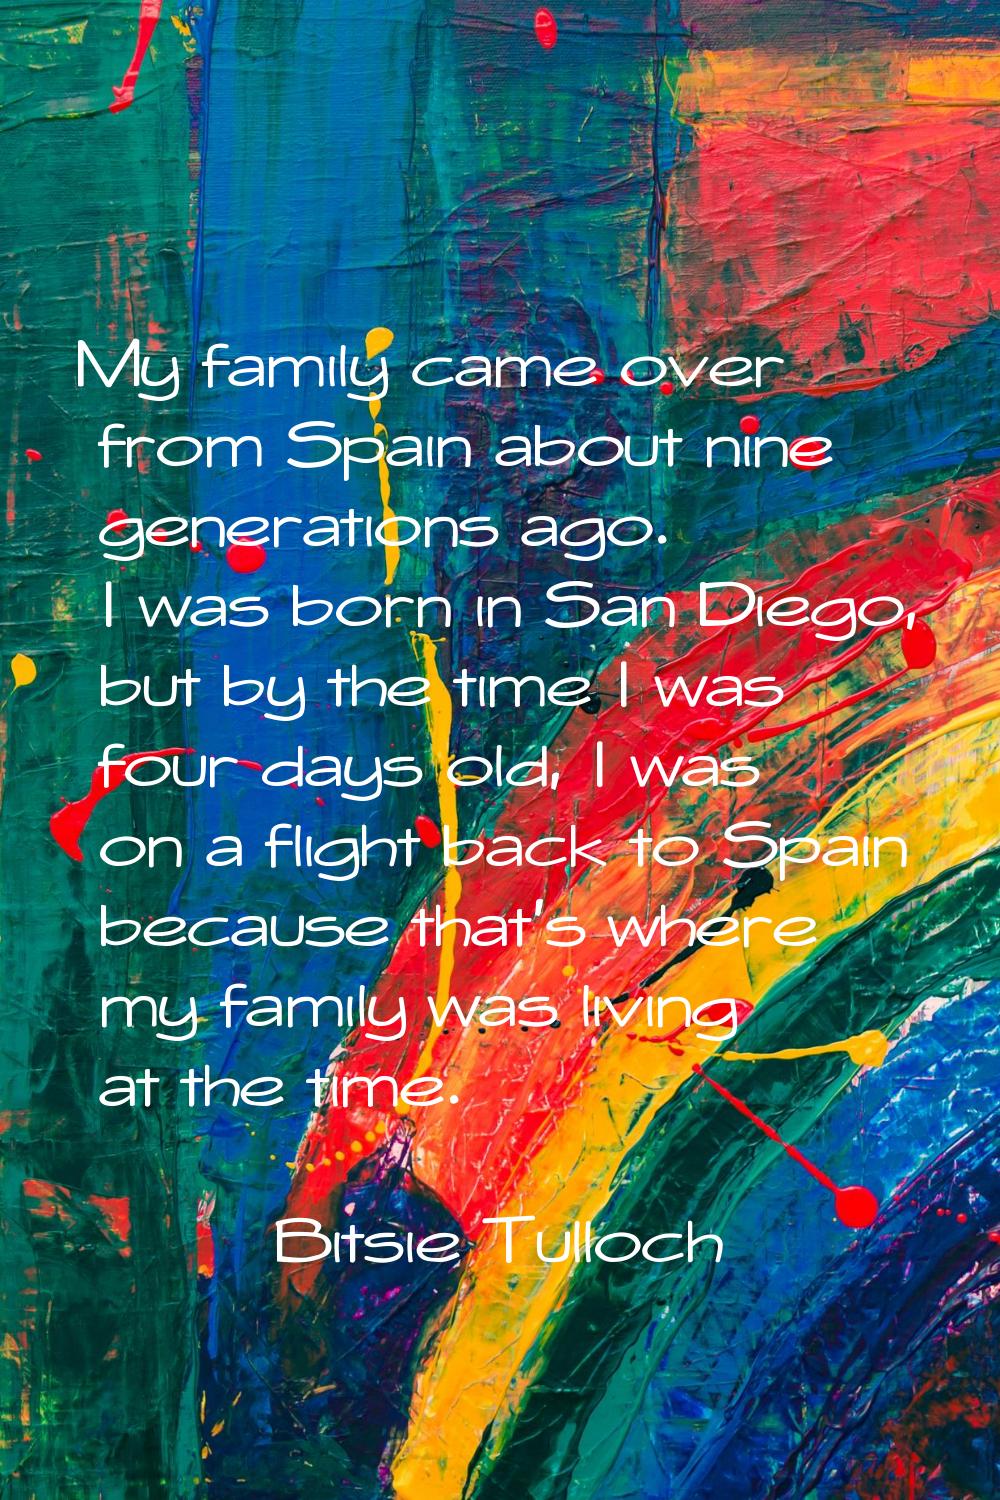 My family came over from Spain about nine generations ago. I was born in San Diego, but by the time